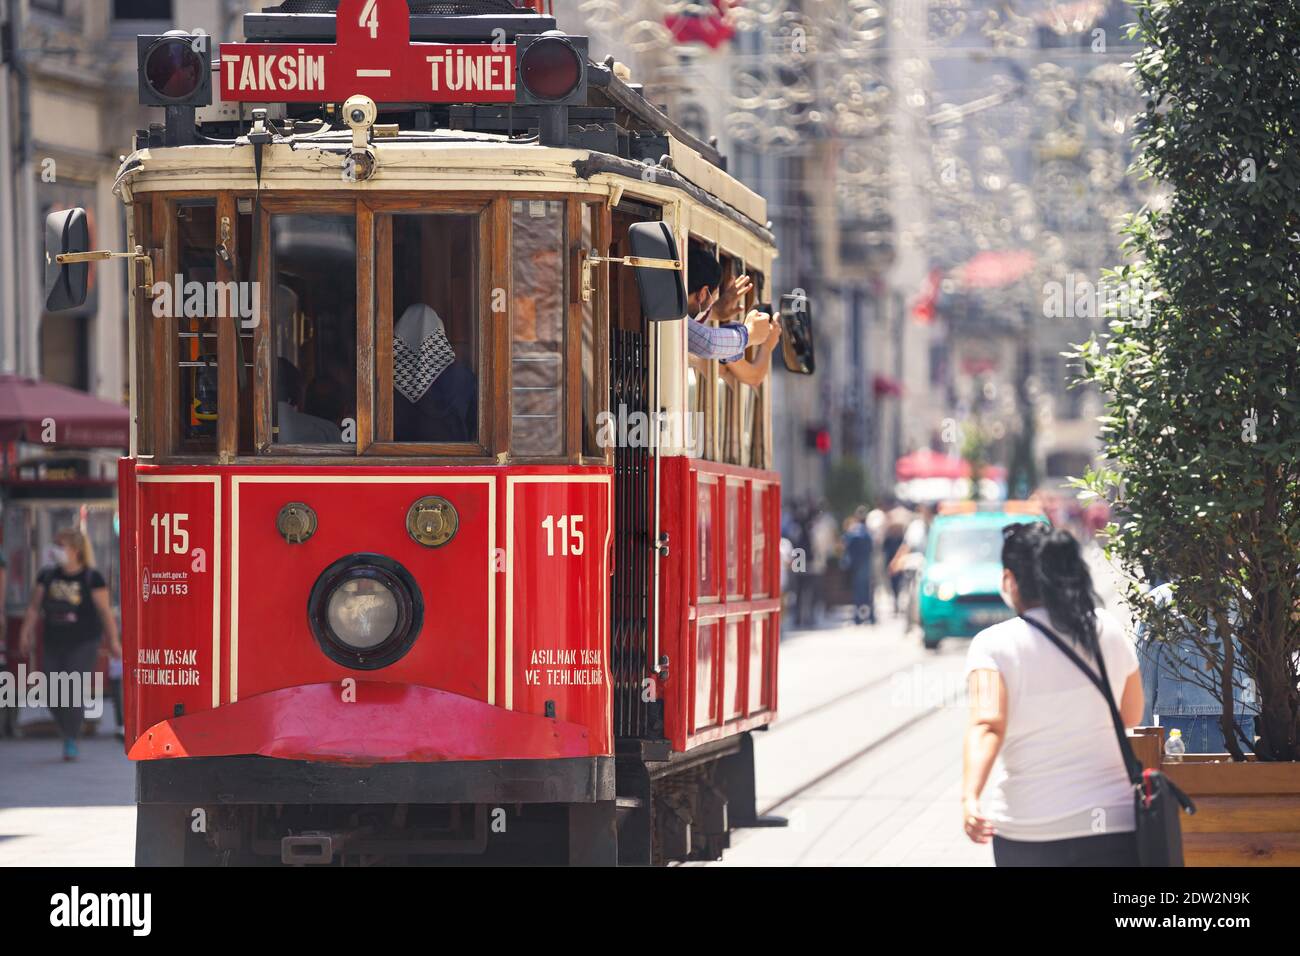 Turkey, Istanbul - June 2020 Red famous vintage tram Taksim square in Istanbul Stock Photo